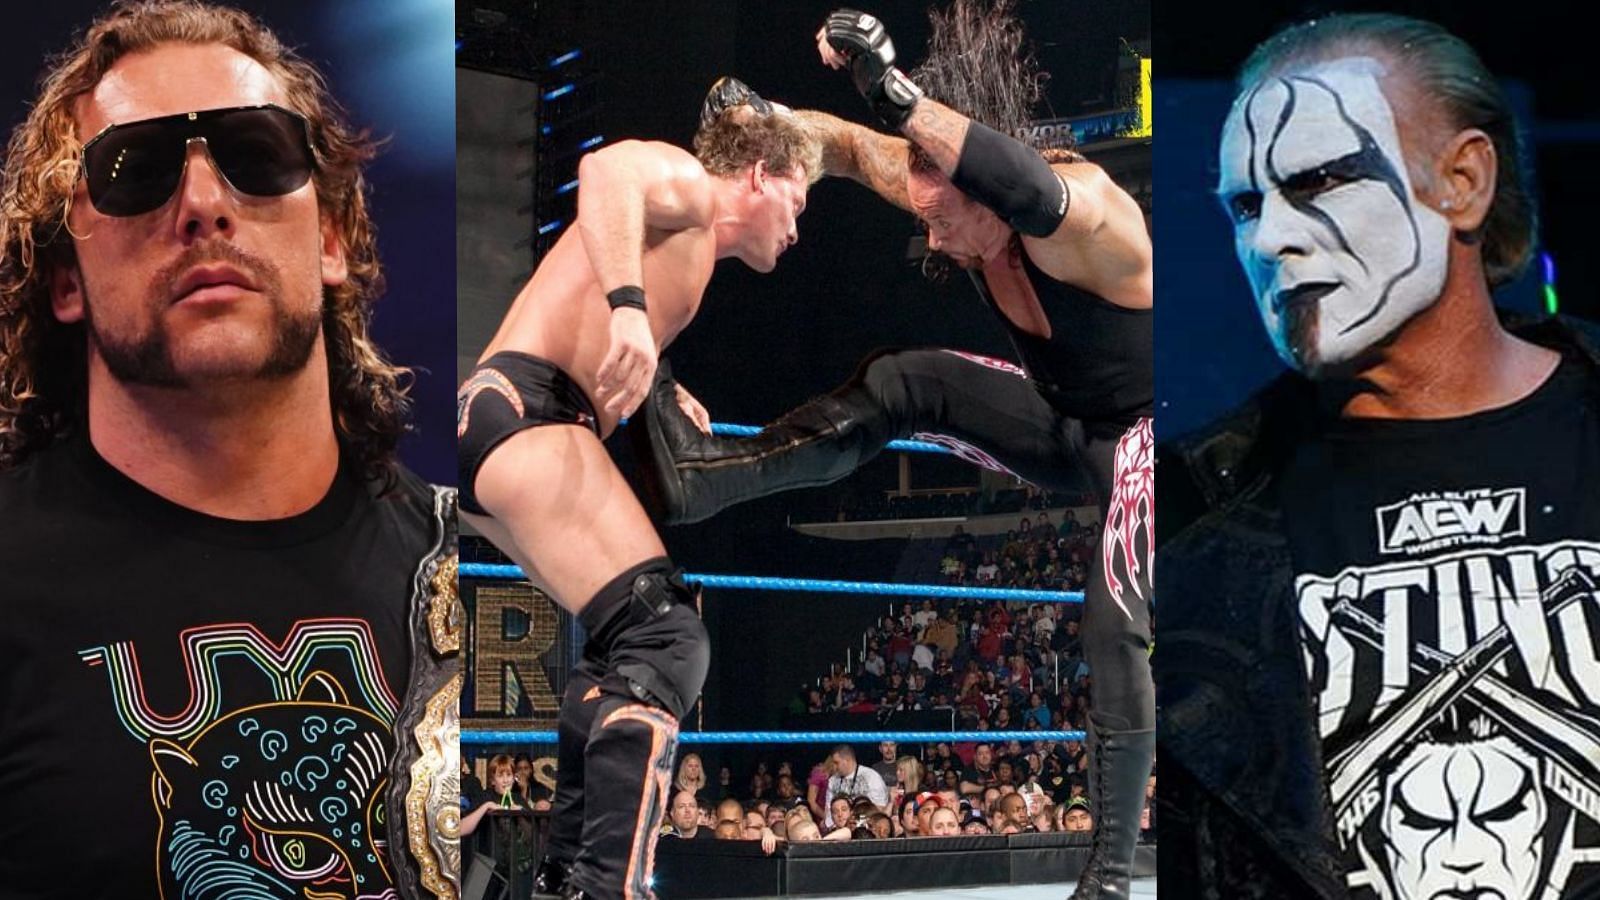 Kenny Omega is still out with an injury, but Chris Jericho and Sting continue to break AEW news.